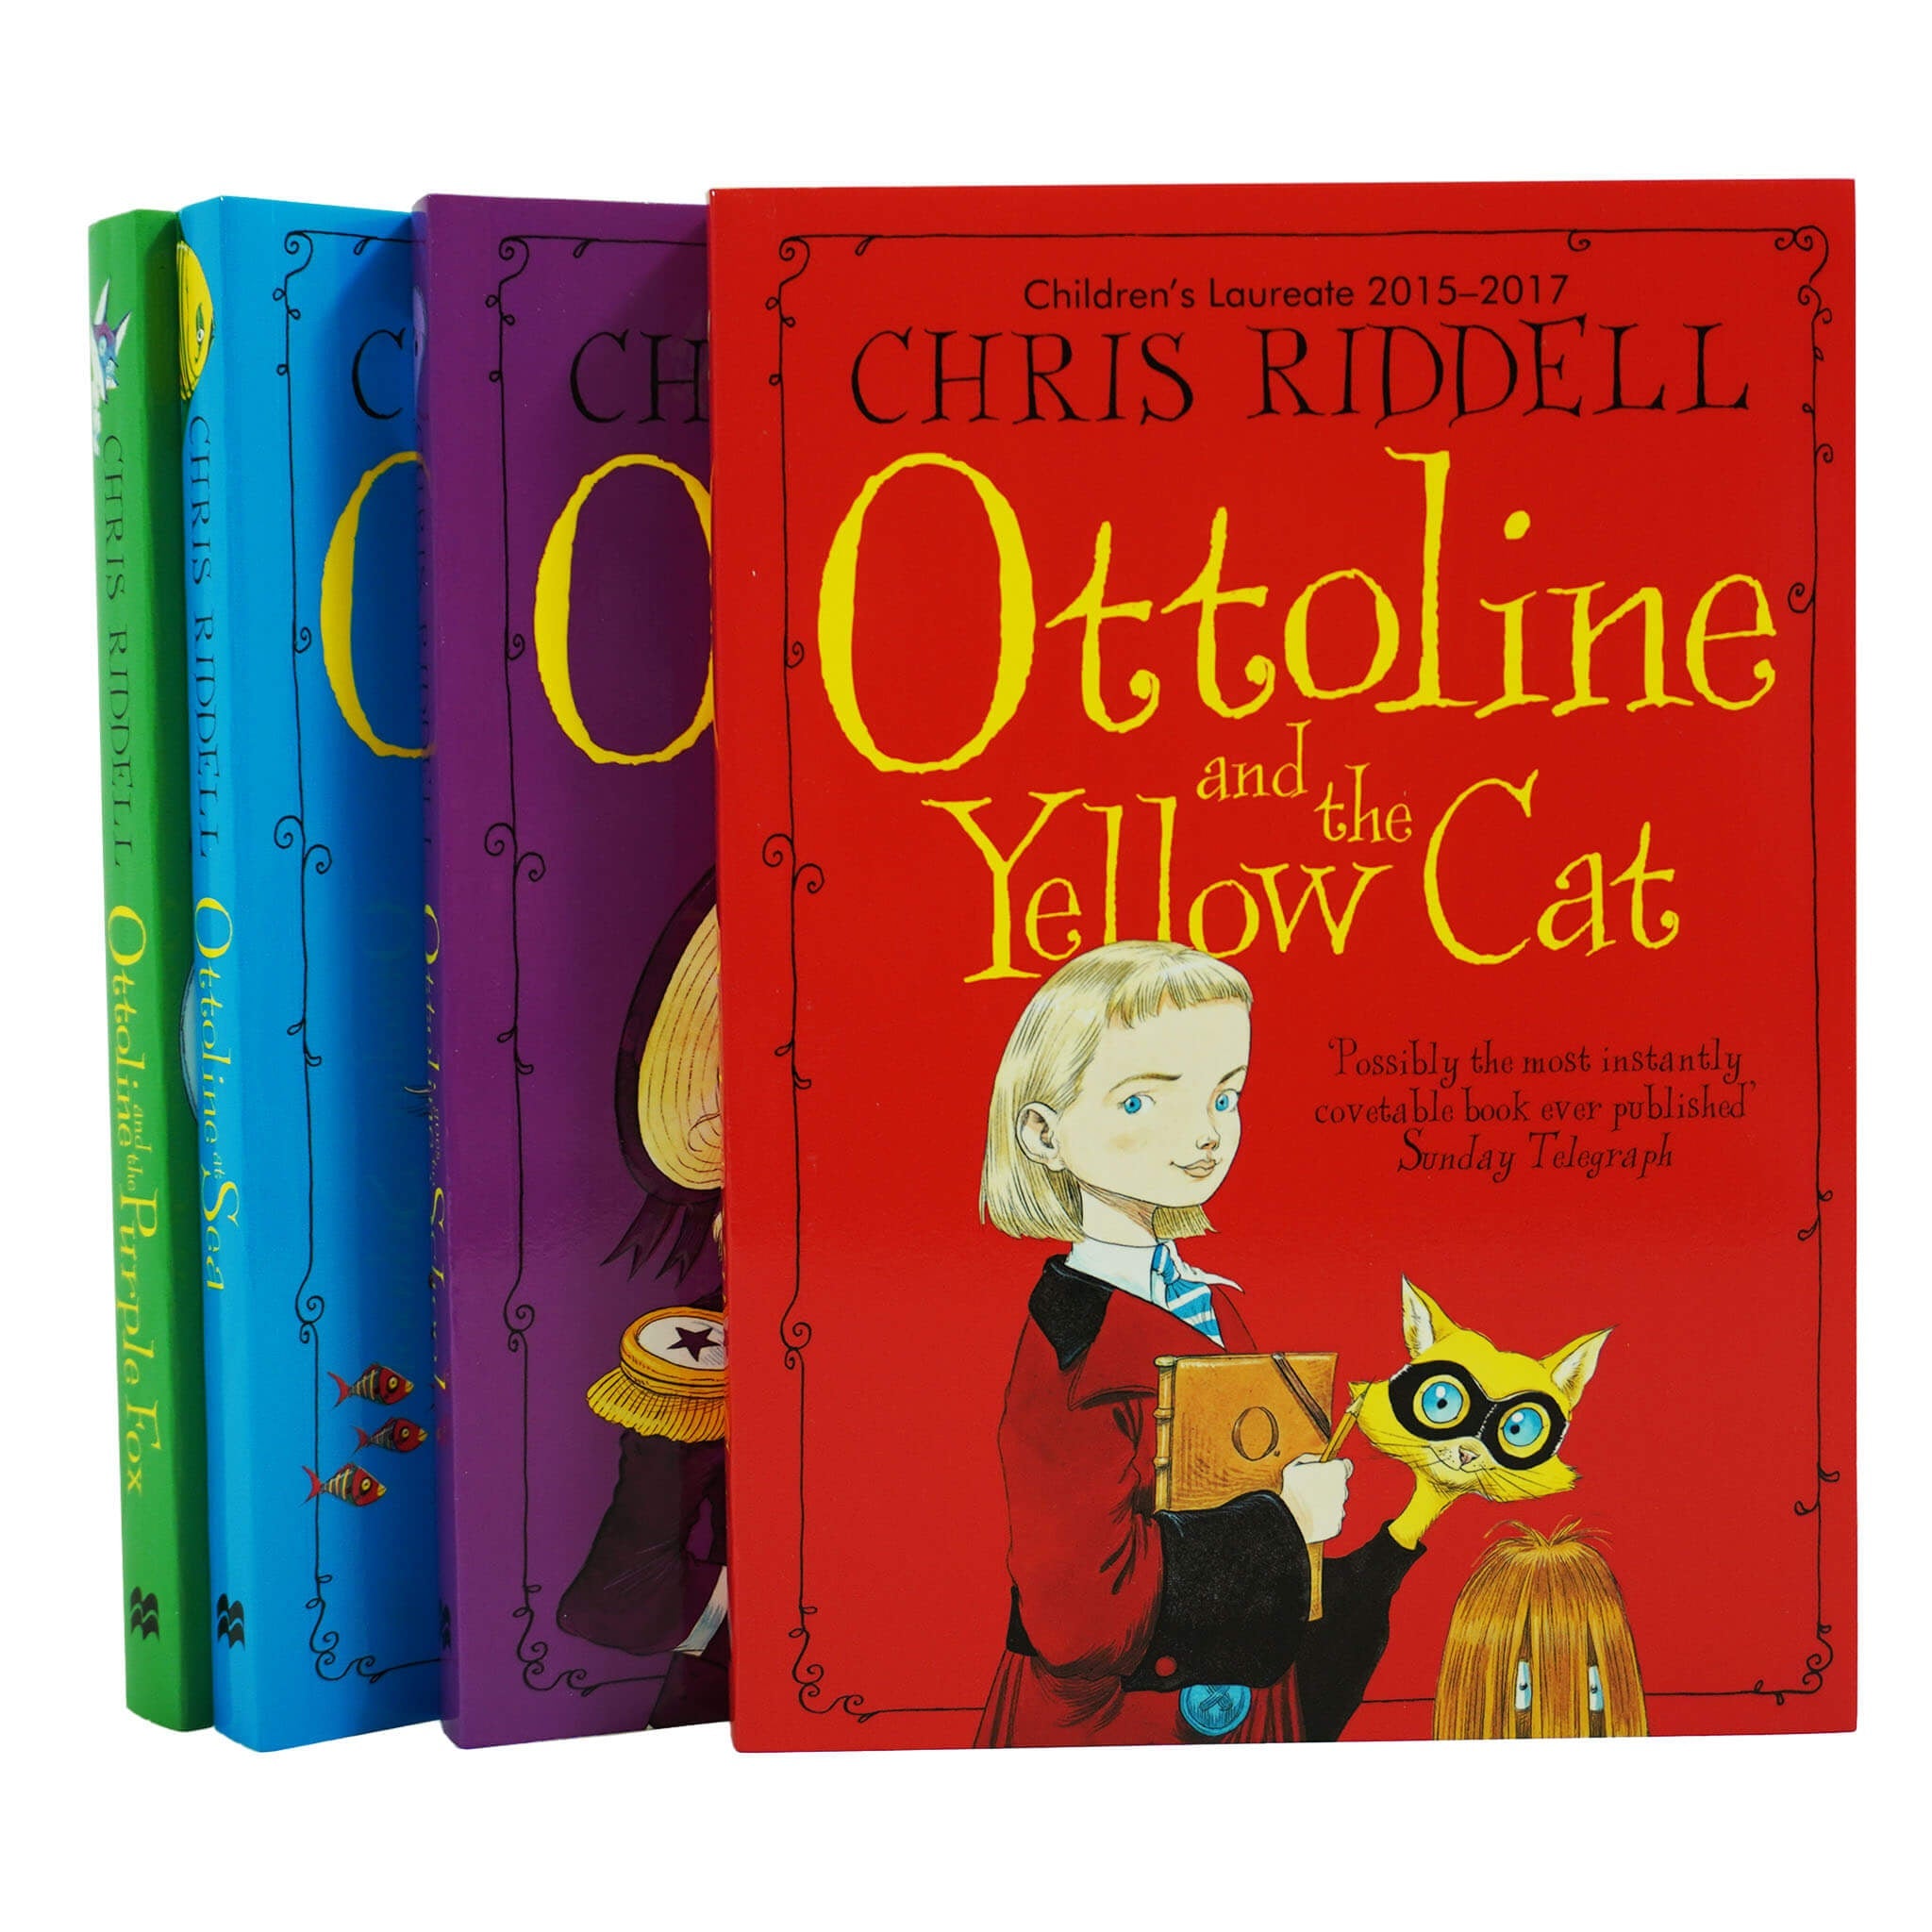 Age 7-9 - Chris Riddell Ottoline Collection 4 Books Set - Ages 7-11 - Paperback